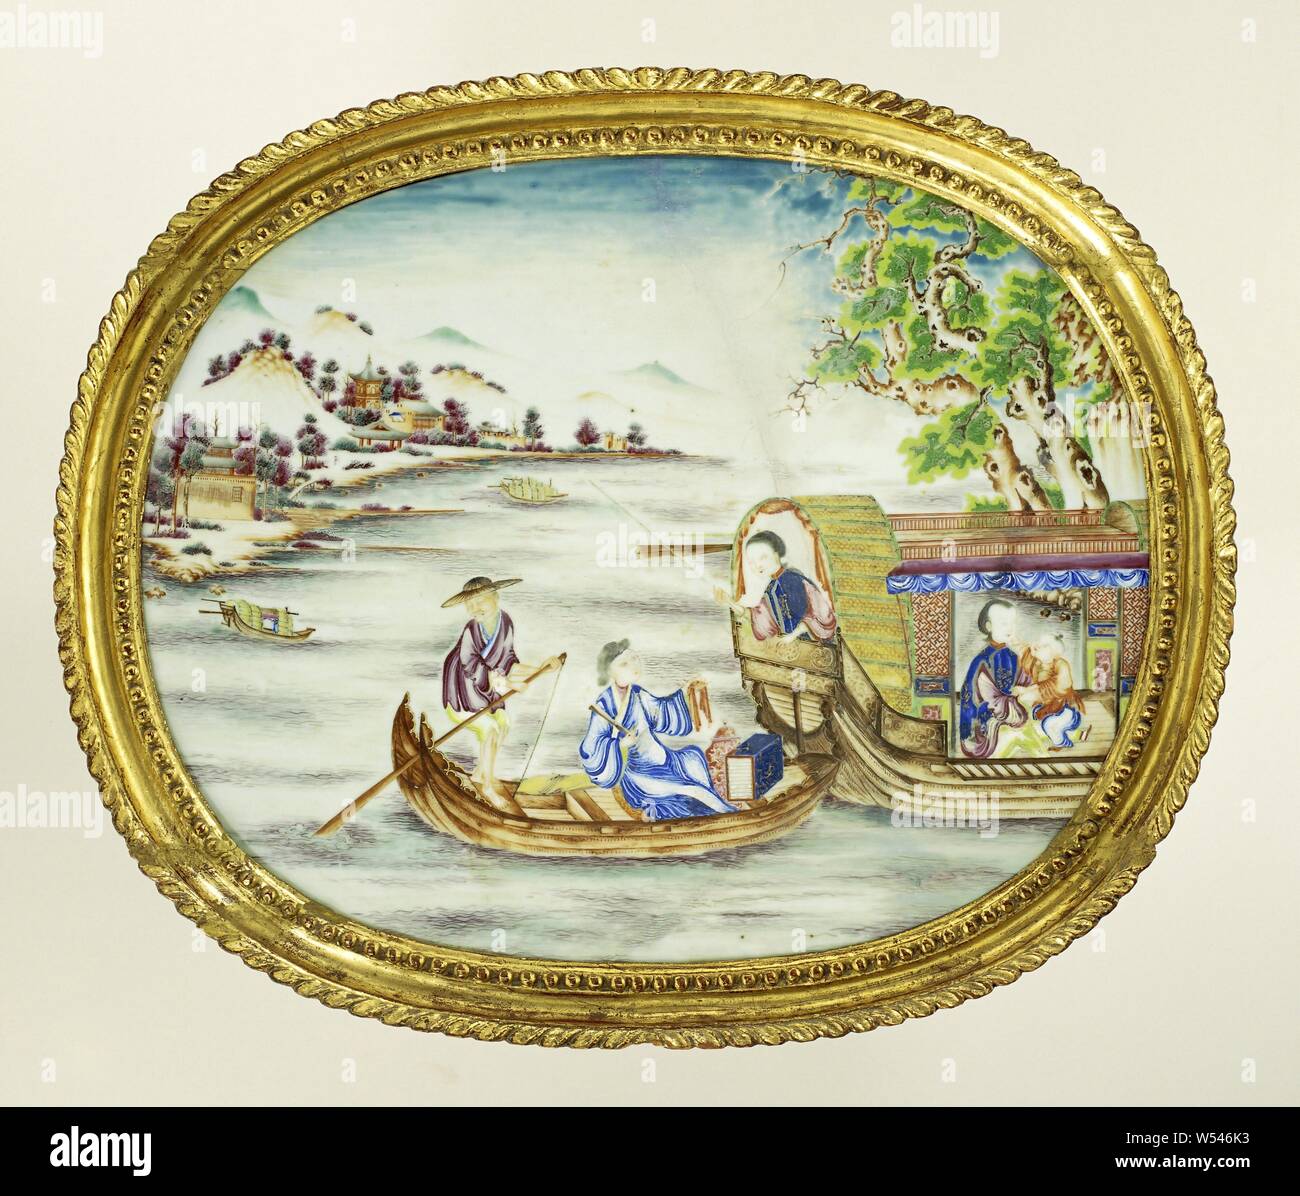 Oval panel with figures in boats in a riverlandscape, Oval plaque of porcelain, painted on the glaze in blue, red, pink, green, yellow, purple, brown, black and gold. The show shows a river landscape with mountains, trees, pavilions and boats. In the foreground a small boat with a rower and a gentleman with objects. They sail next to a larger boat, from which a lady leans out at the rear. The gentleman shows her an object. In the larger boat a second lady and a boy. Original gold-plated frame. Porcelain with enamel colors, Jean Theodore Royer, anonymous, China, c. 1770 - c. 1775, Qing-dynasty Stock Photo